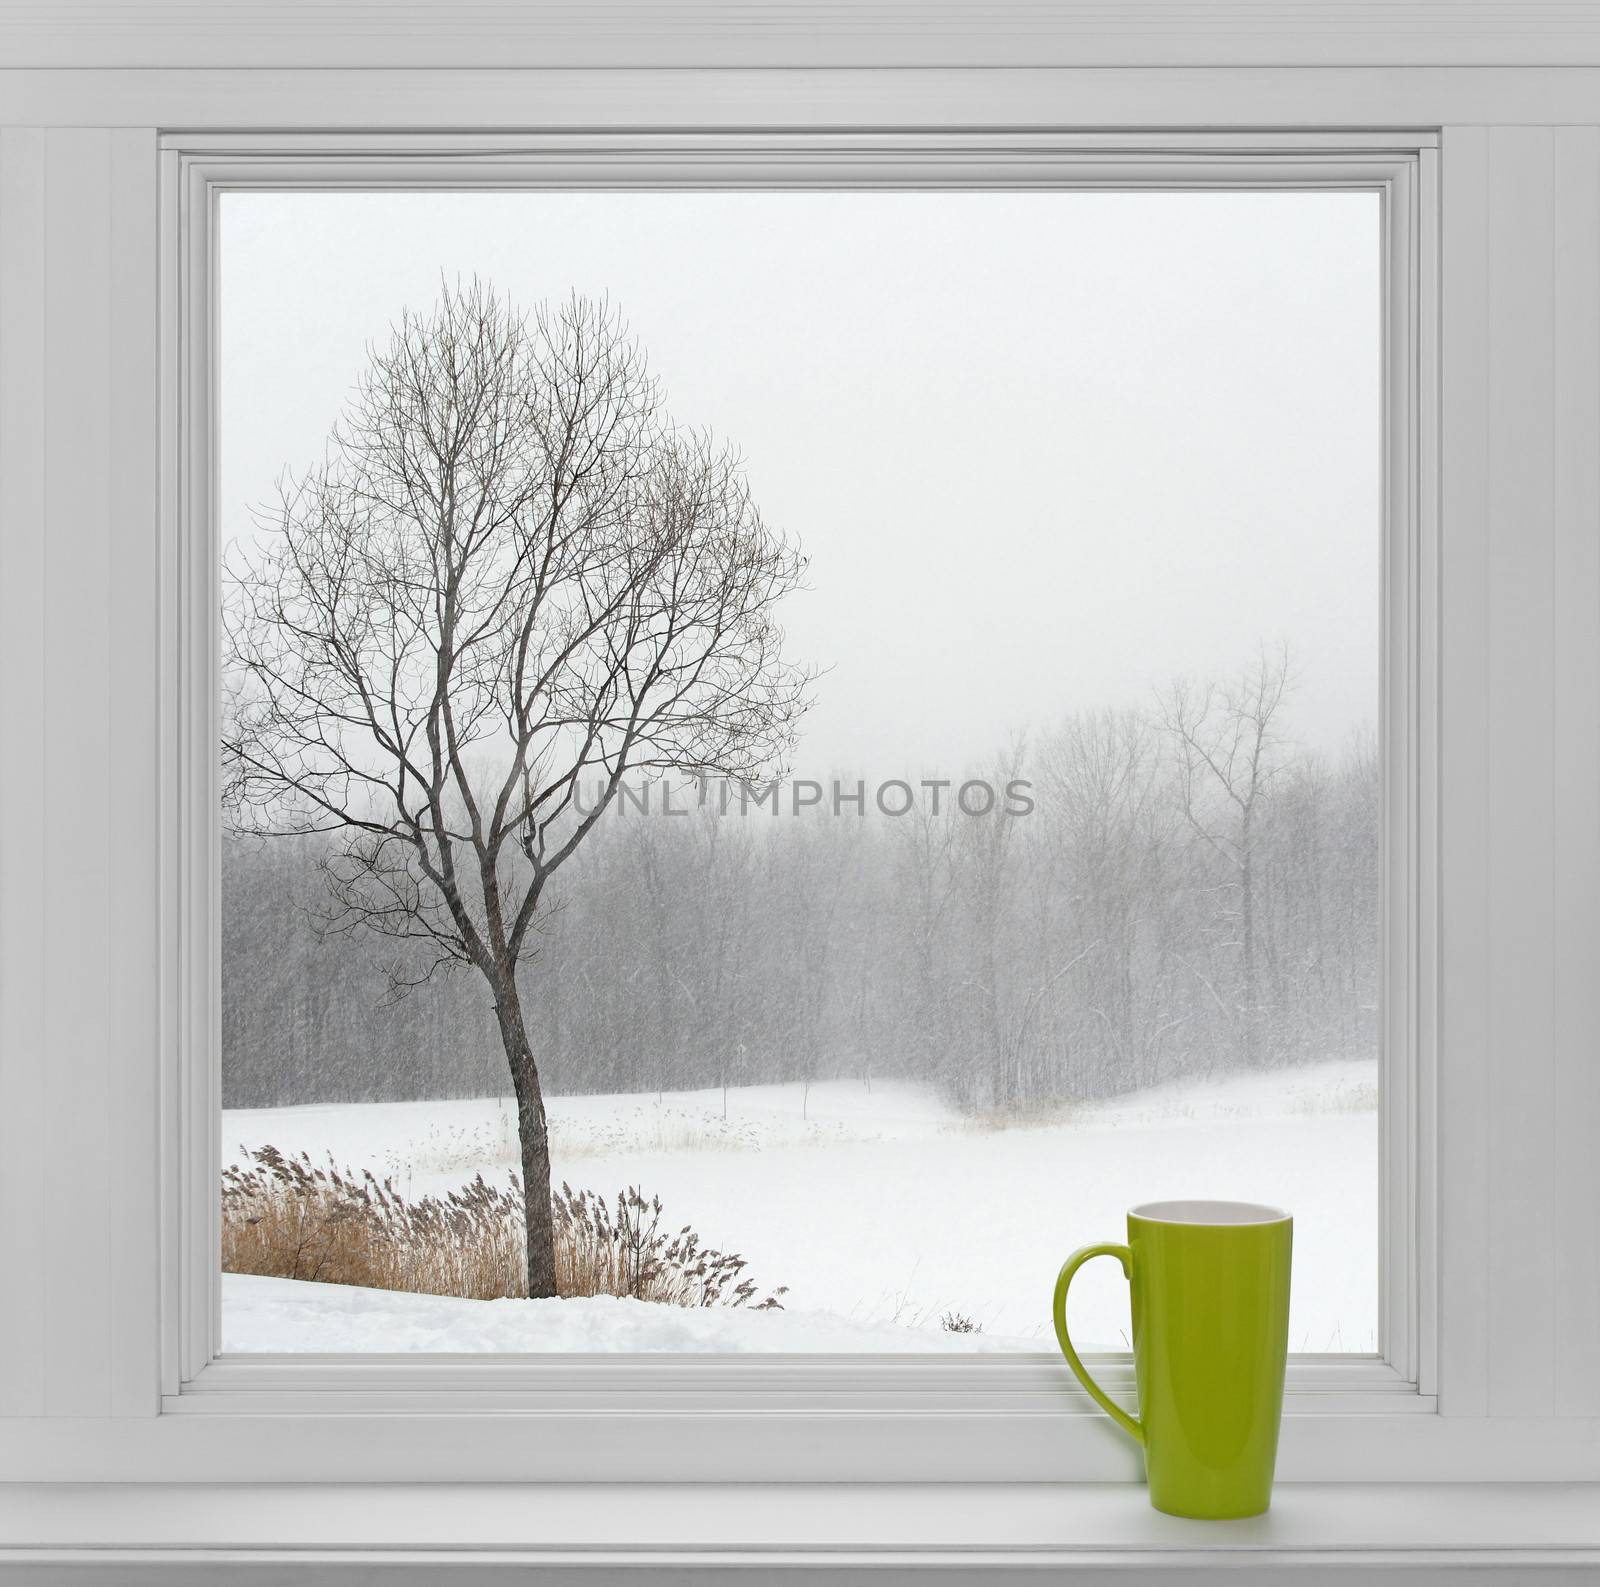 Green teacup on a windowsill, with winter landscape seen through the window.